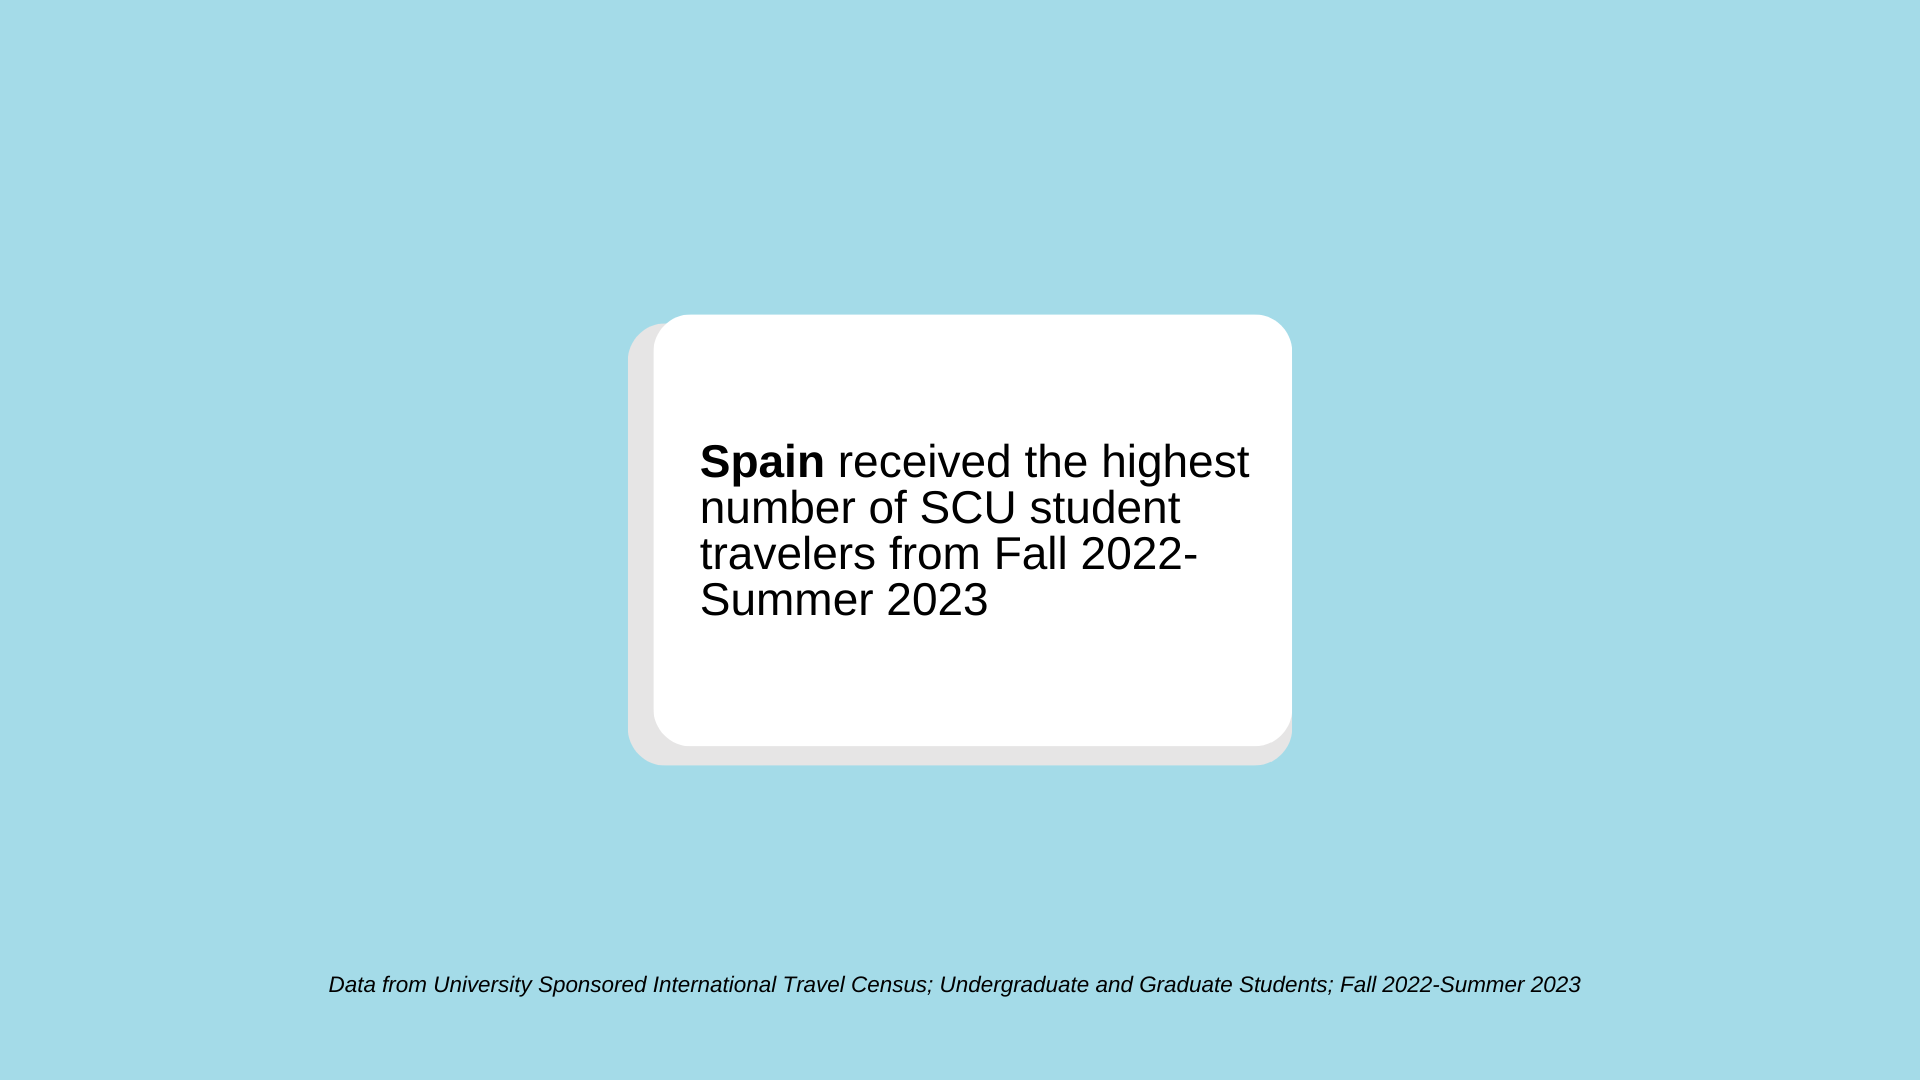 Spain received the highest number of SCU student travelers from Fall 2022- Summer 2023; Data from University Sponsored International Travel Census; Undergraduate and Graduate Students; Fall 2022-Summer 2023